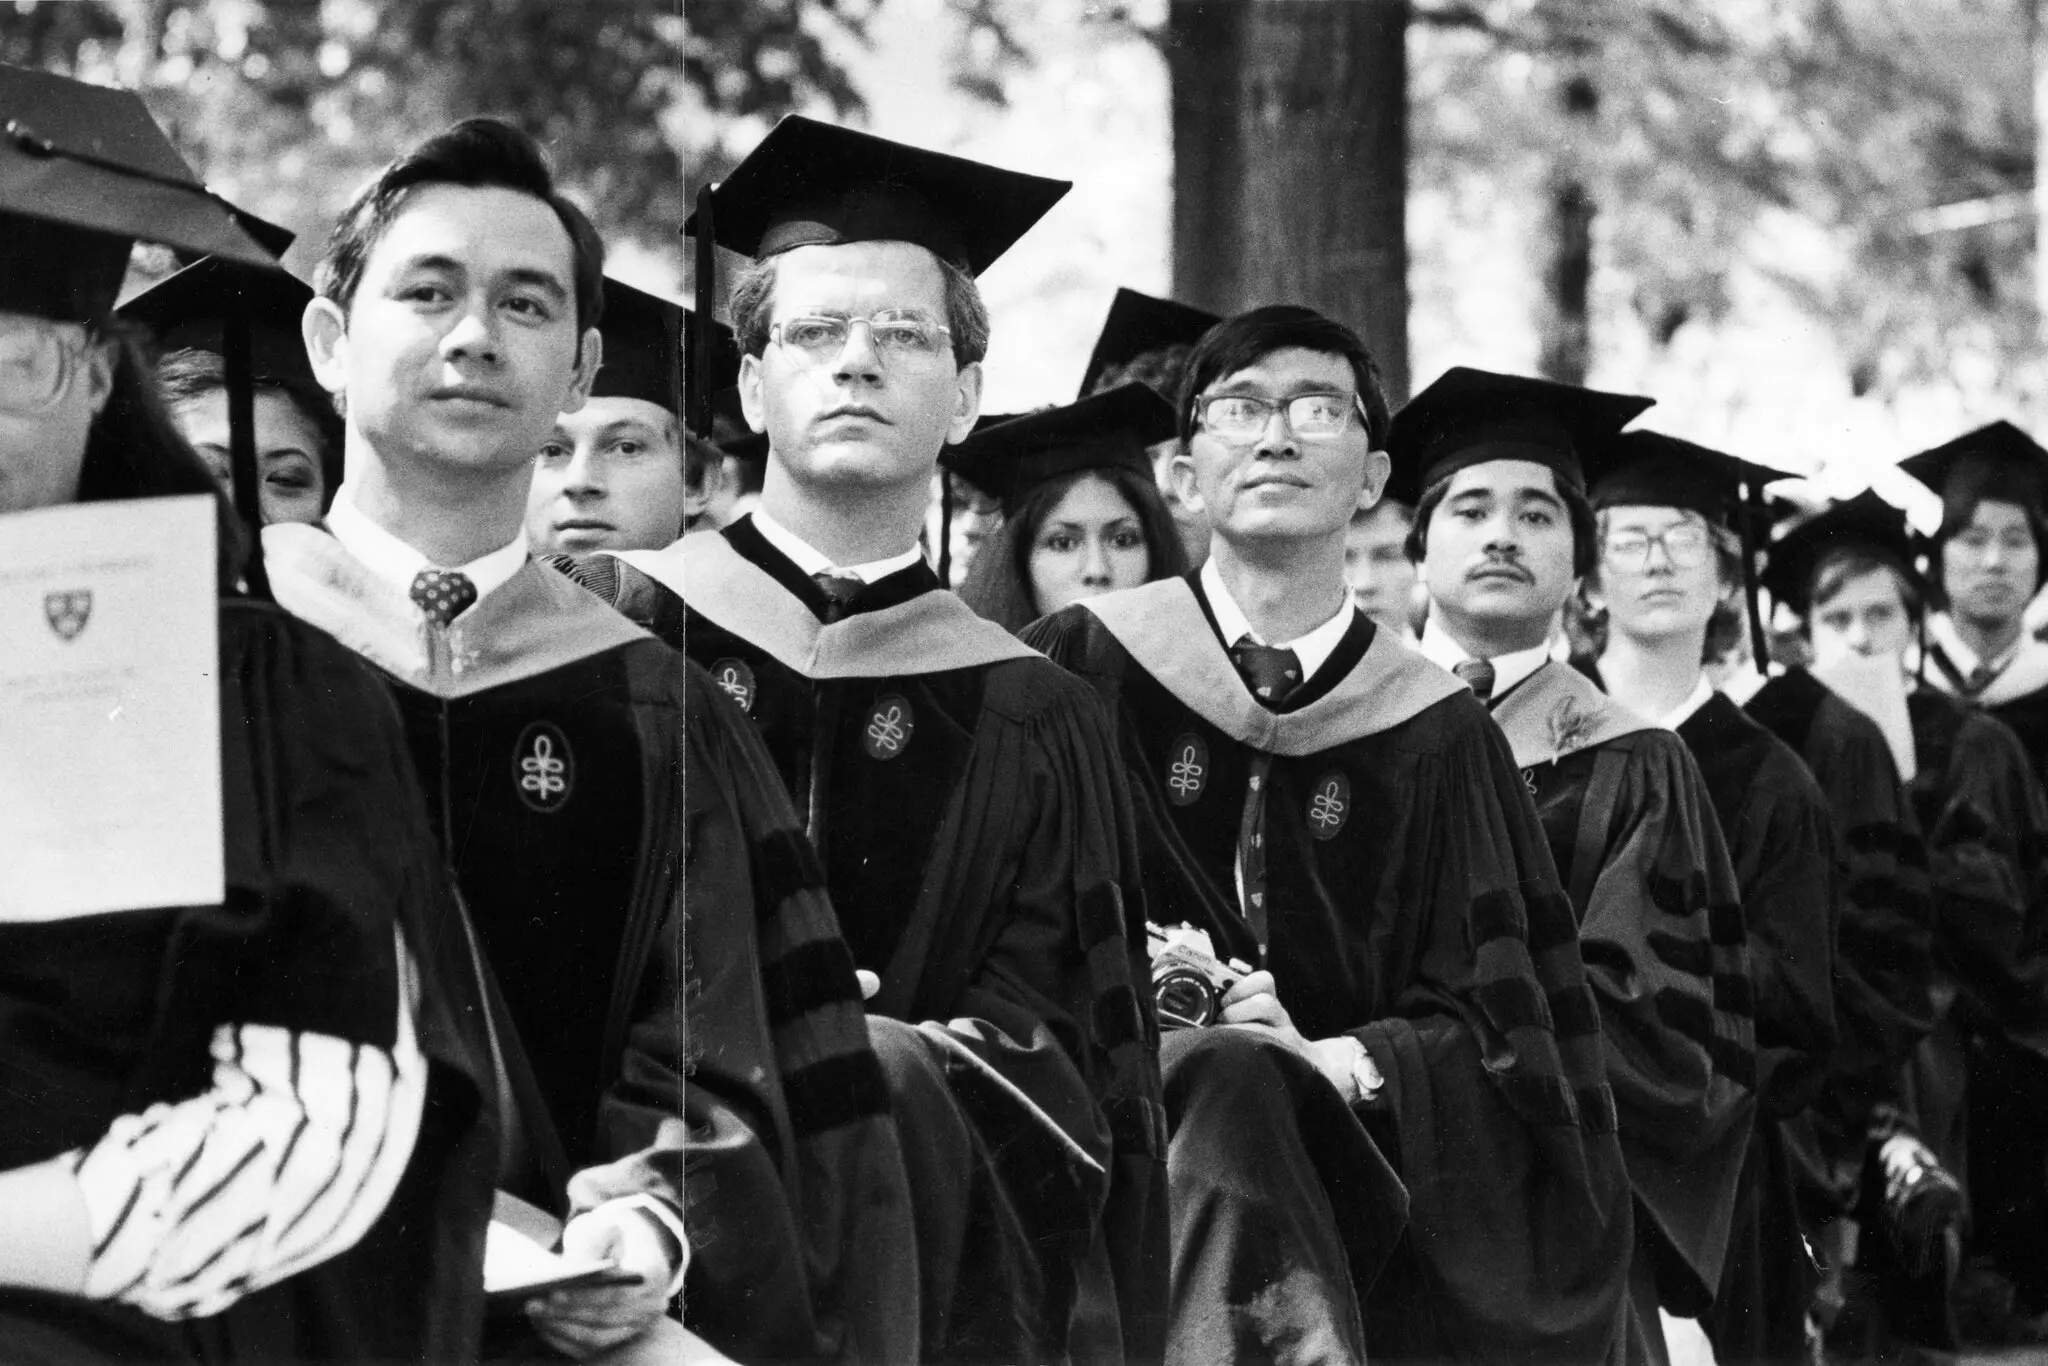 A black and white photo of mostly white men matriculated at Harvard with one Asian American student.